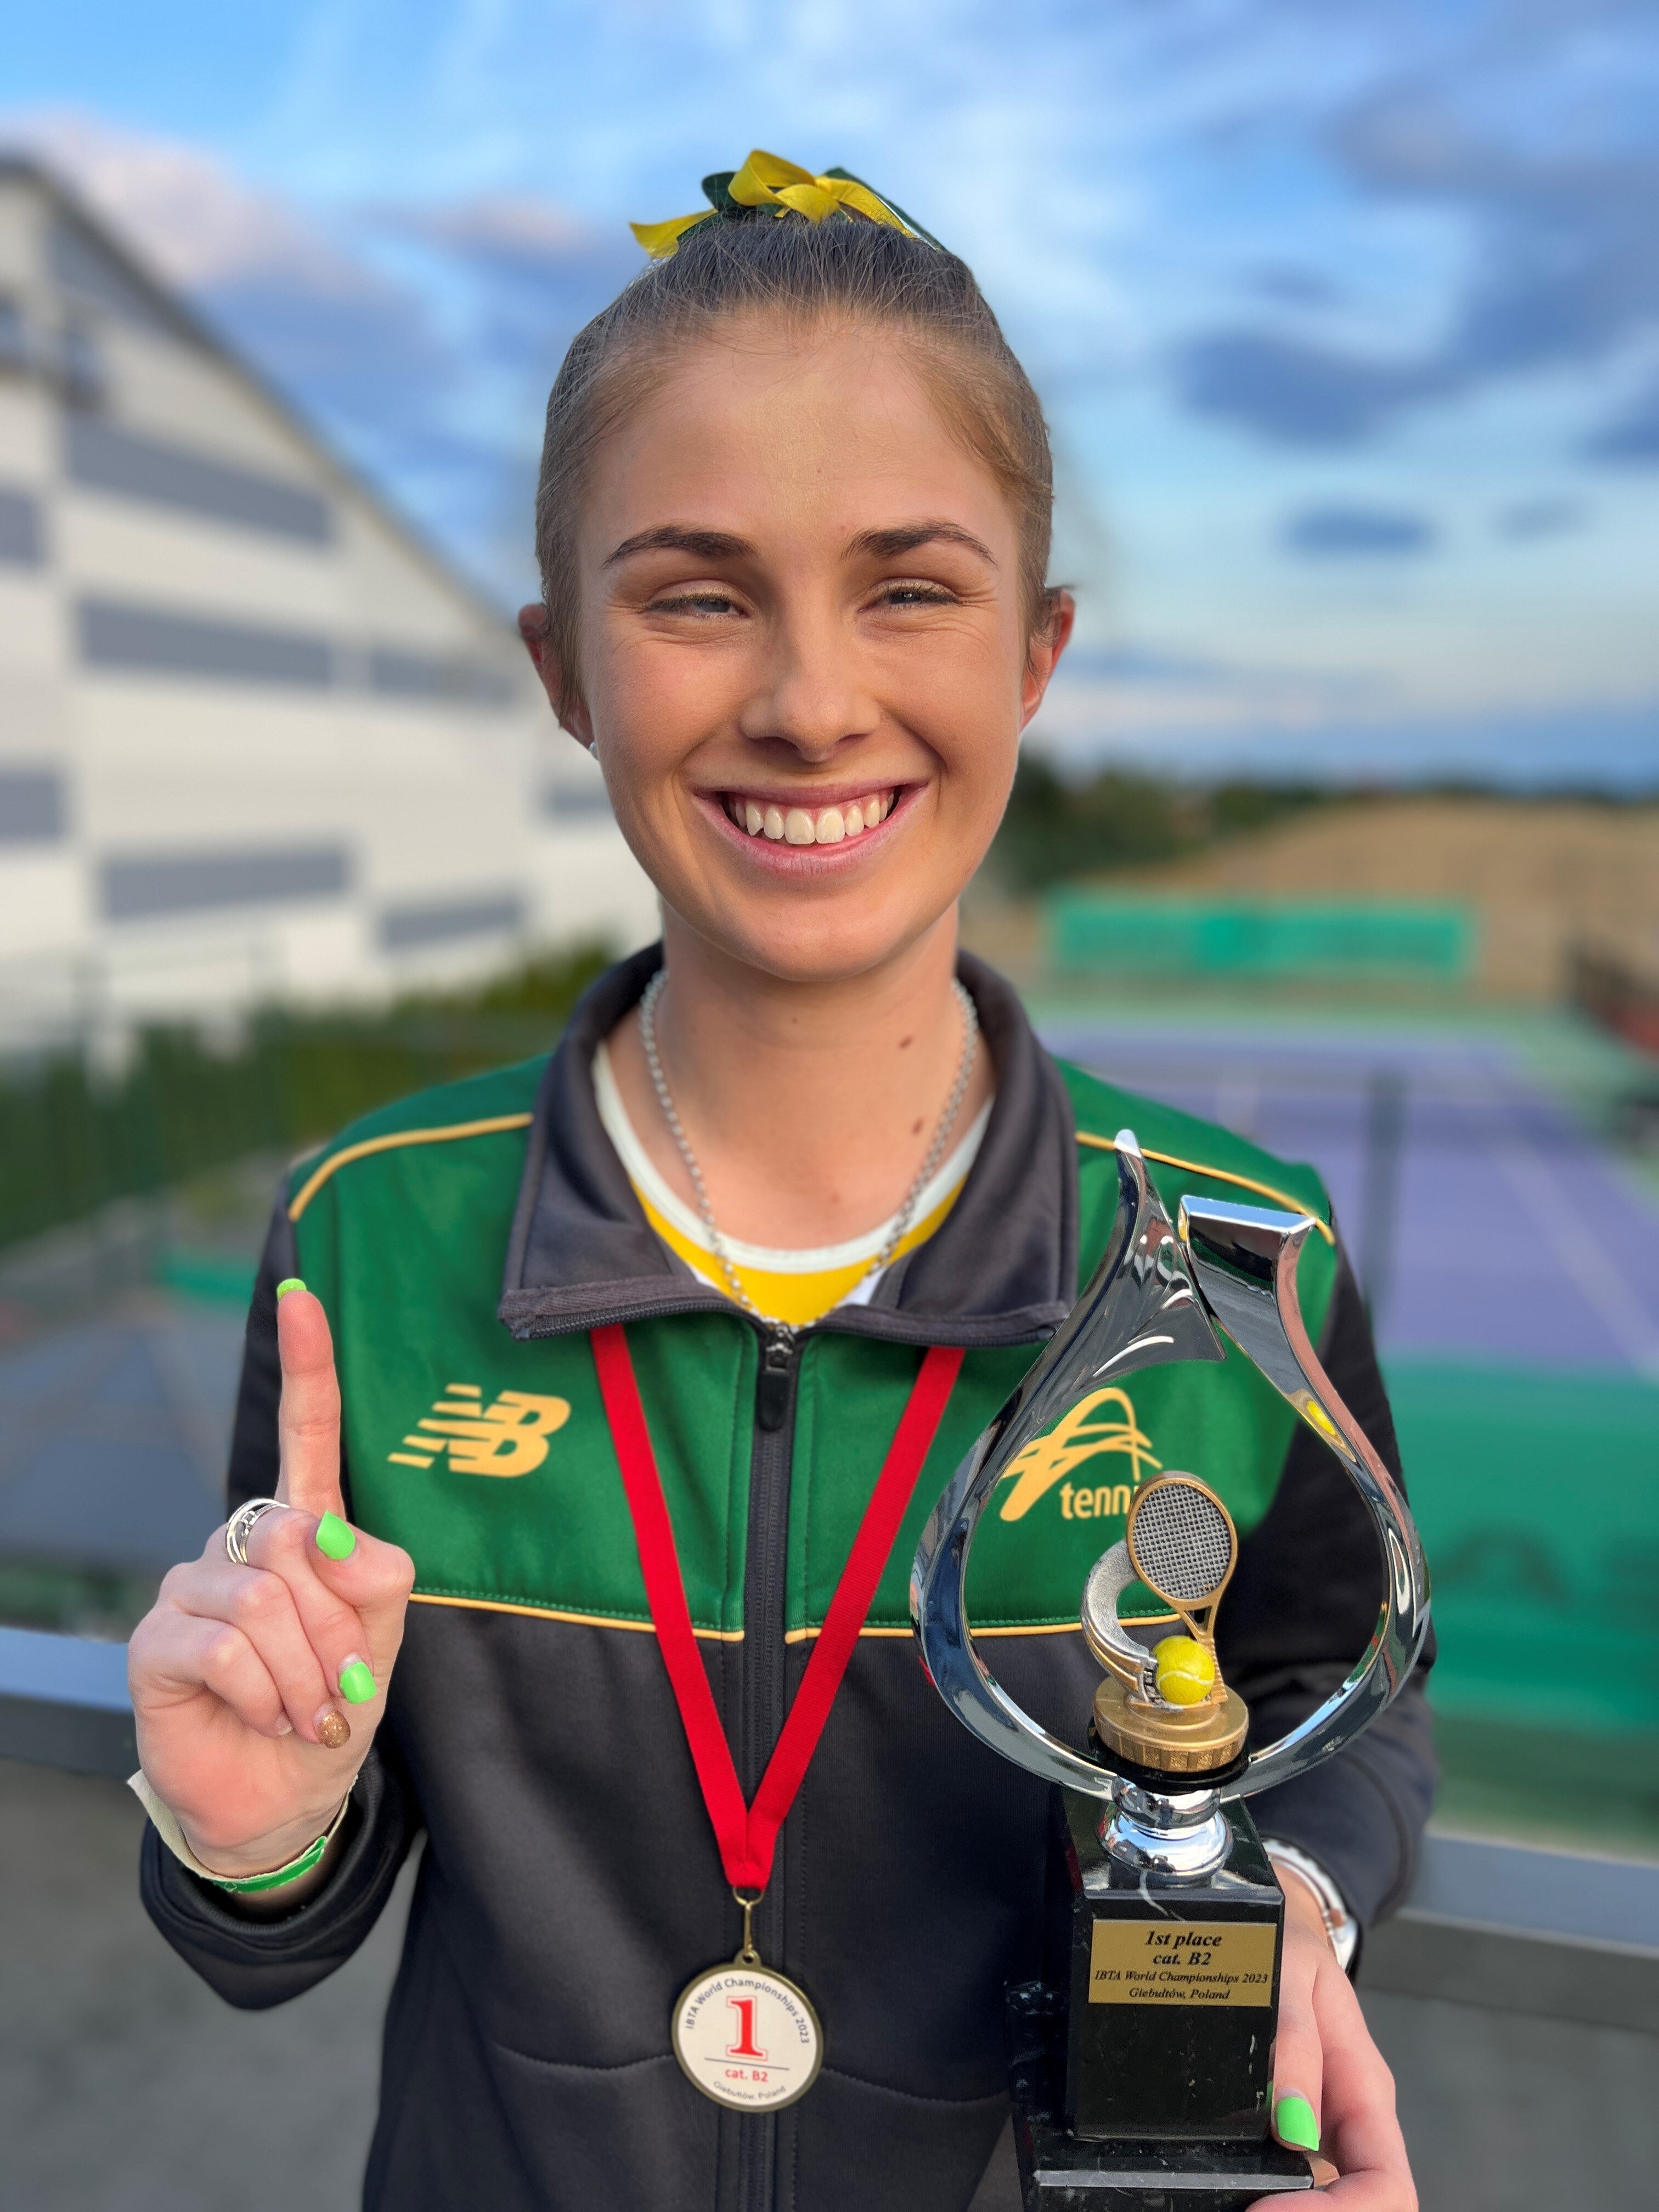 A young woman stands in a green and gold jacket holding a trophy and holding up one finger as a winner.